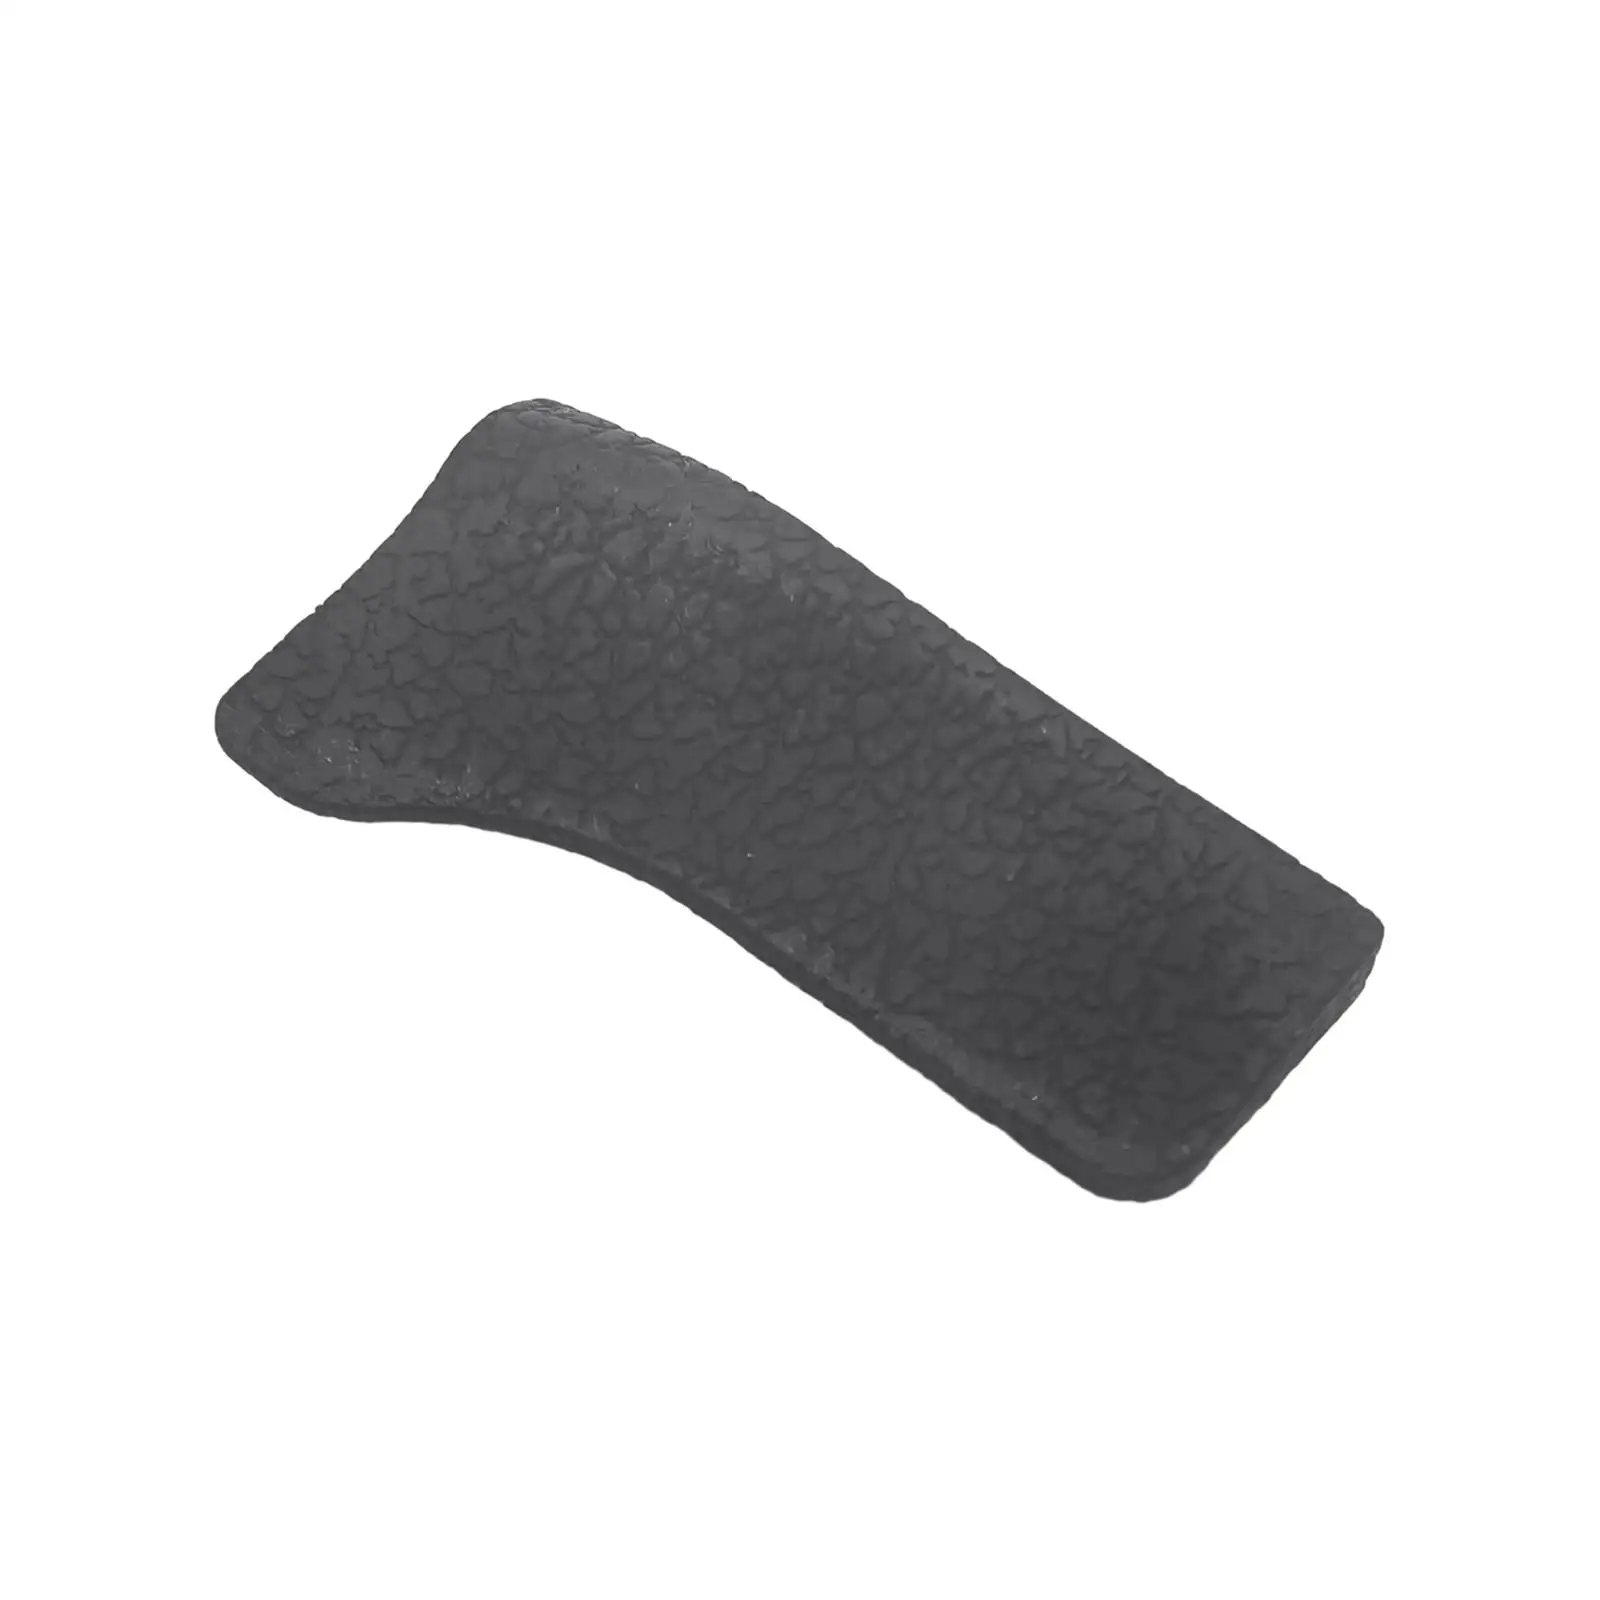 Thumb Rubber Back Cover Easy to Install Durable High Quality Black Fine Surface Processing DSLR Direct Replace for D300S